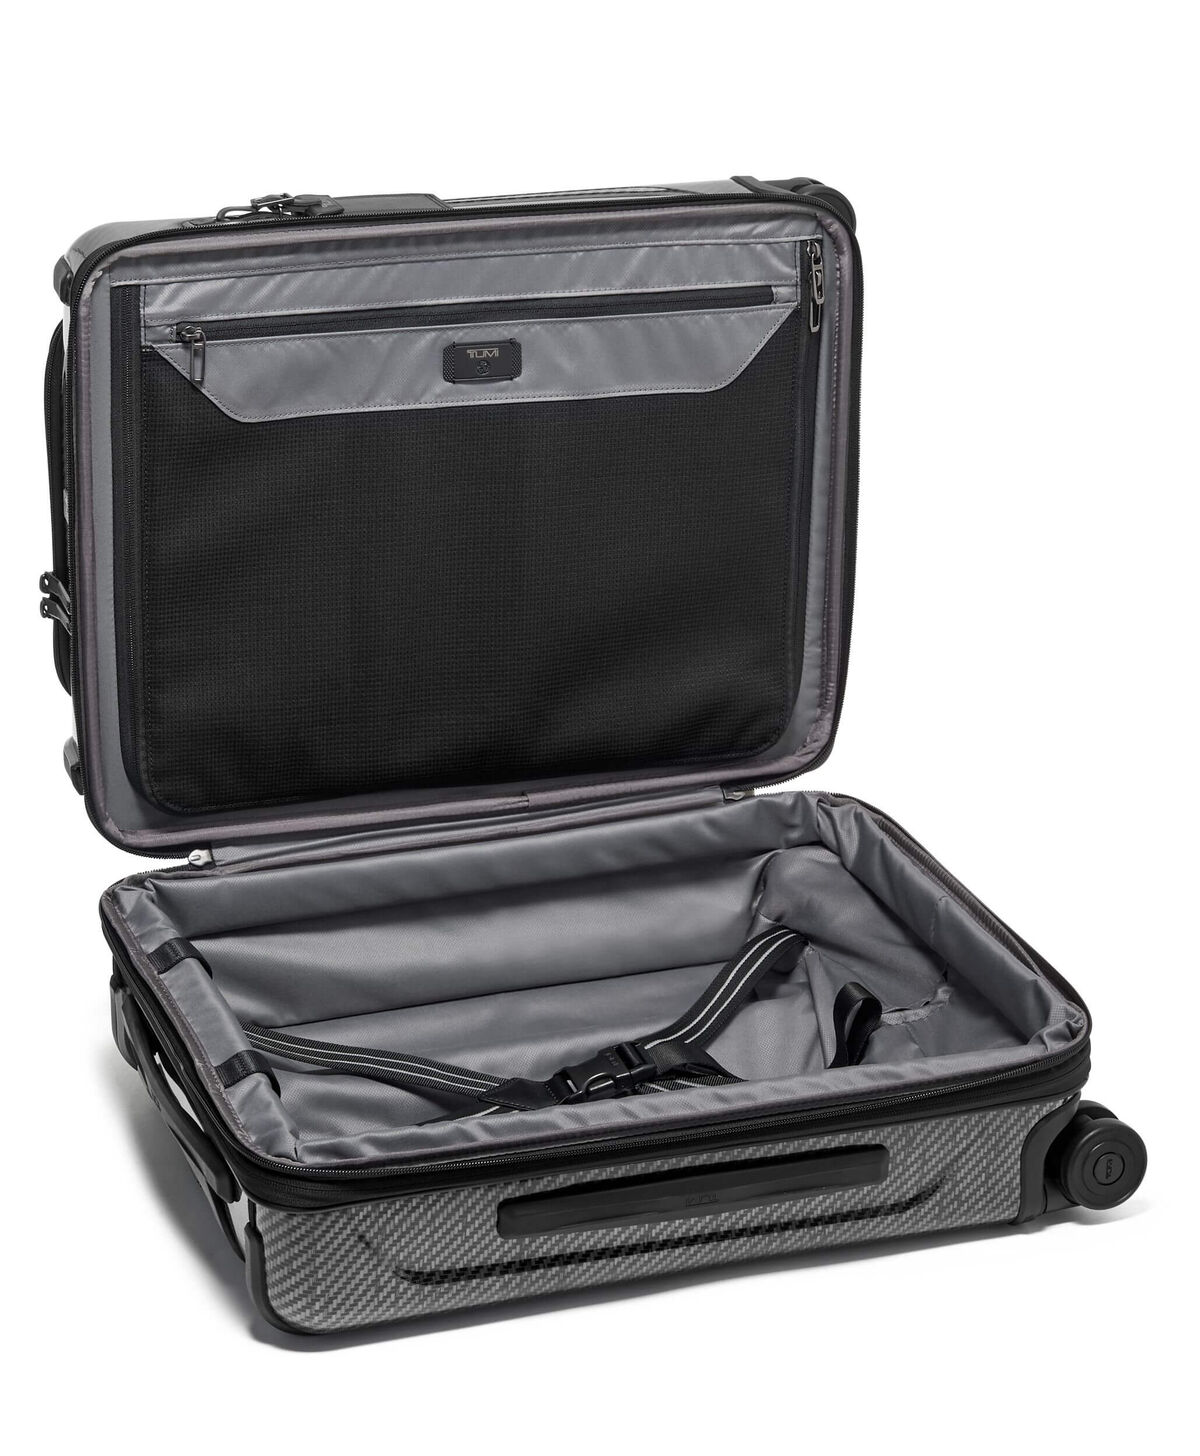 Tegra-Lite Continental Front Pocket Expandable Carry-On 55 cm | TUMI UK